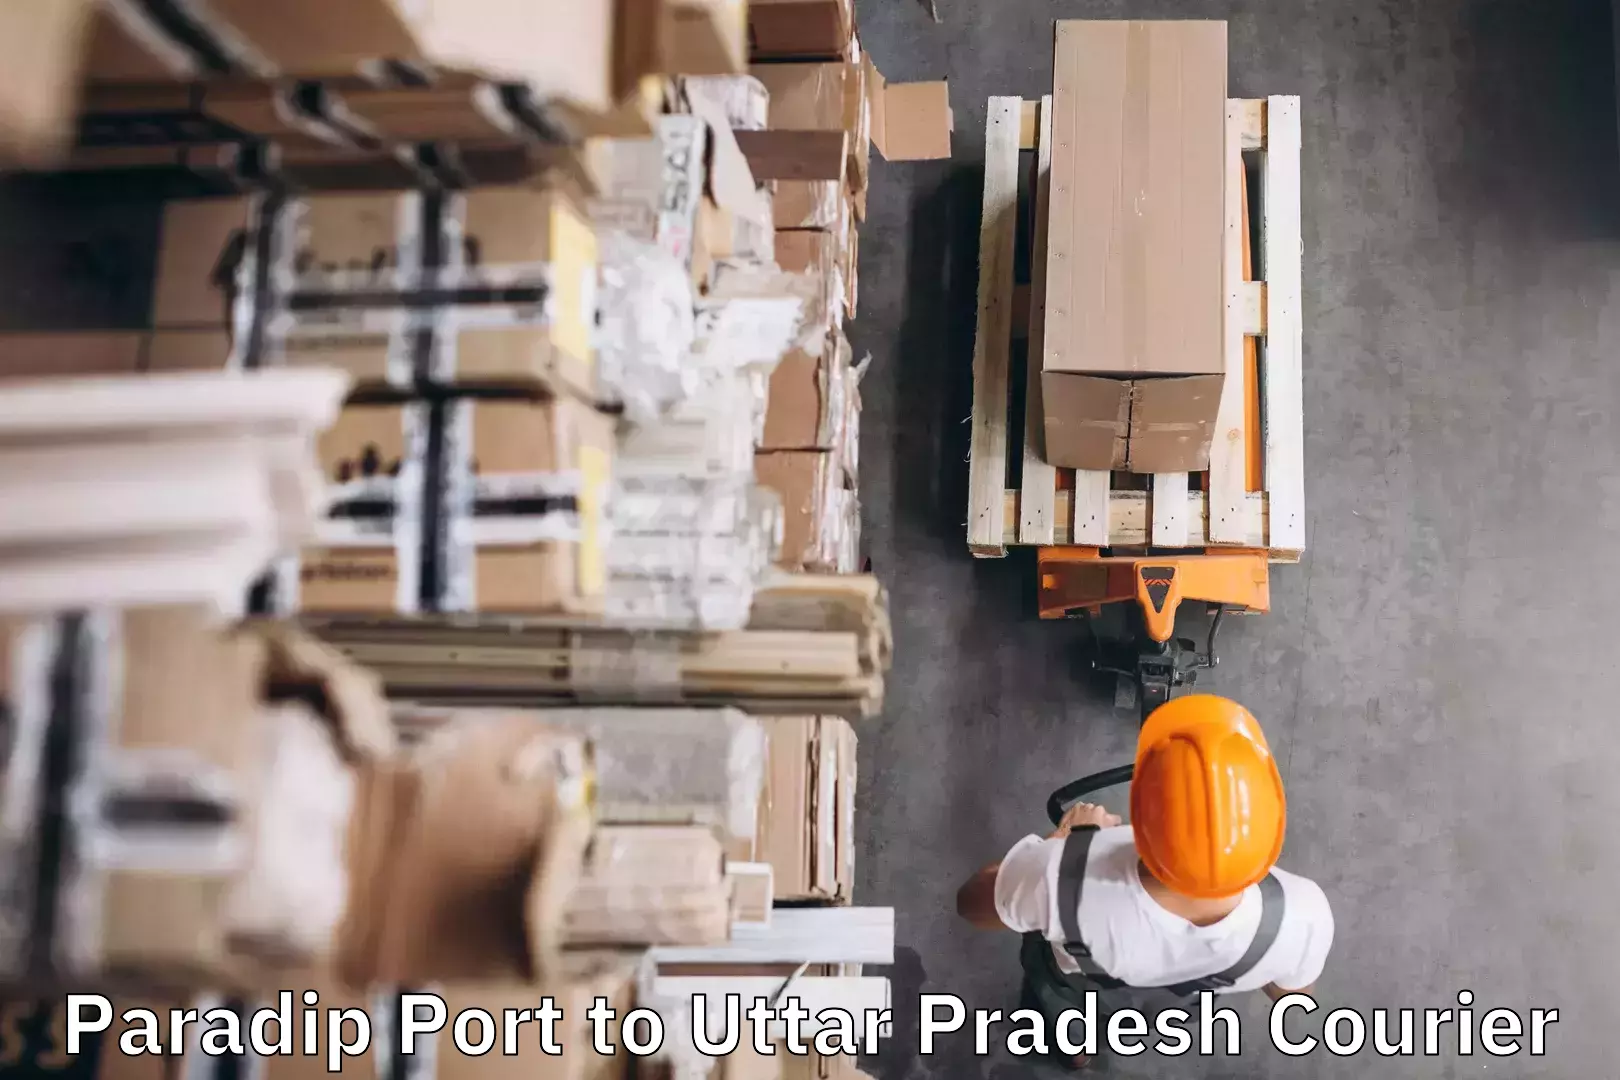 Reliable luggage courier Paradip Port to Manda